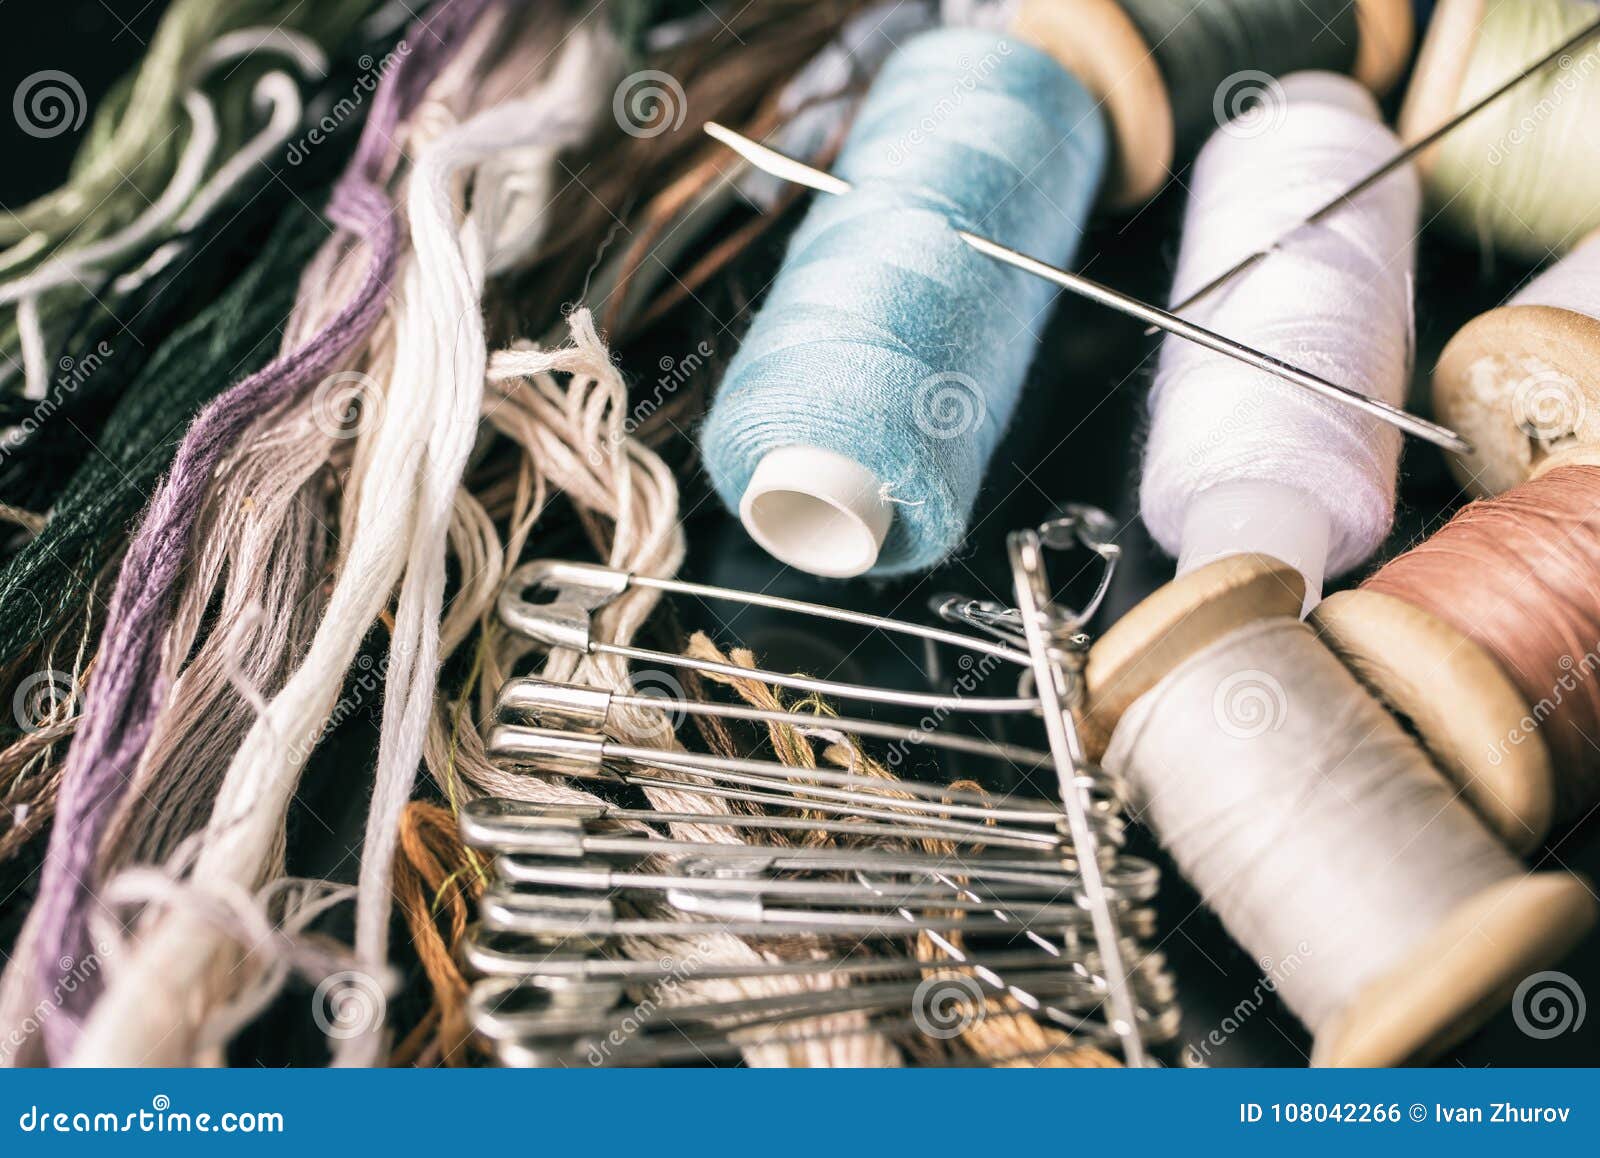 Sewing Accessories: Threads, Yarn, Needles, Pins. Stock Photo - Image ...